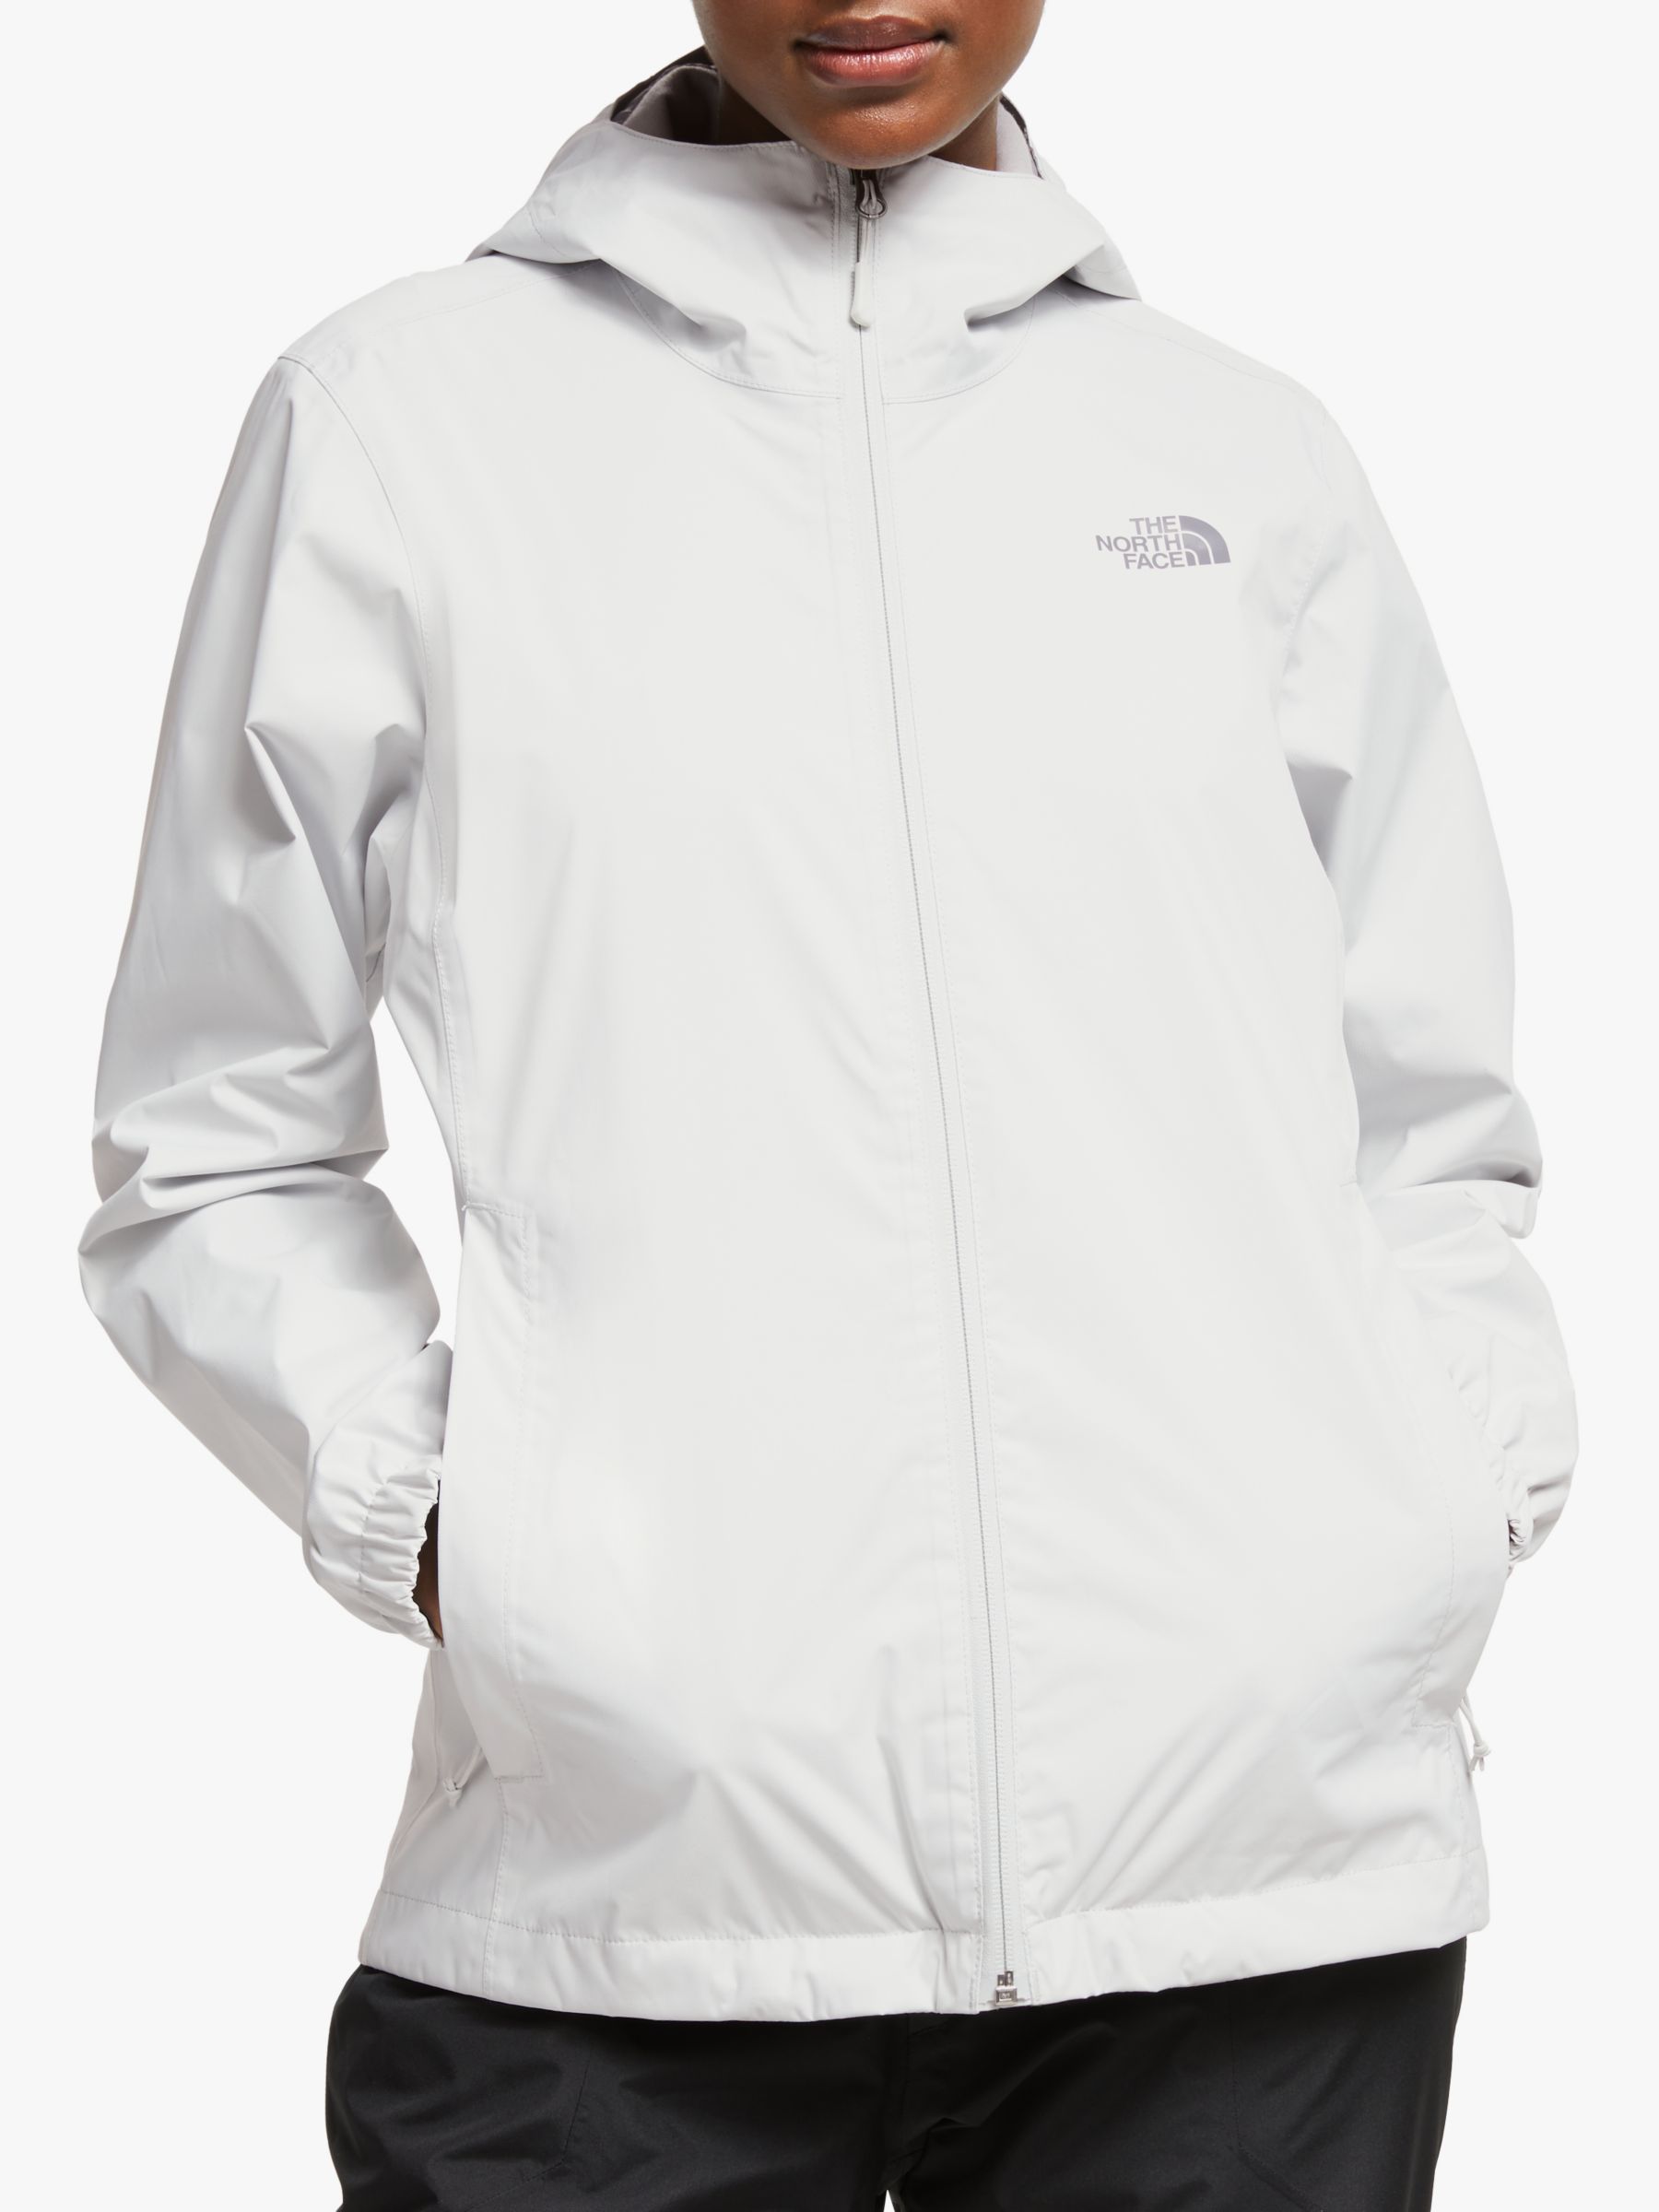 The North Face Quest Women's Waterproof Jacket, Tin Grey, S